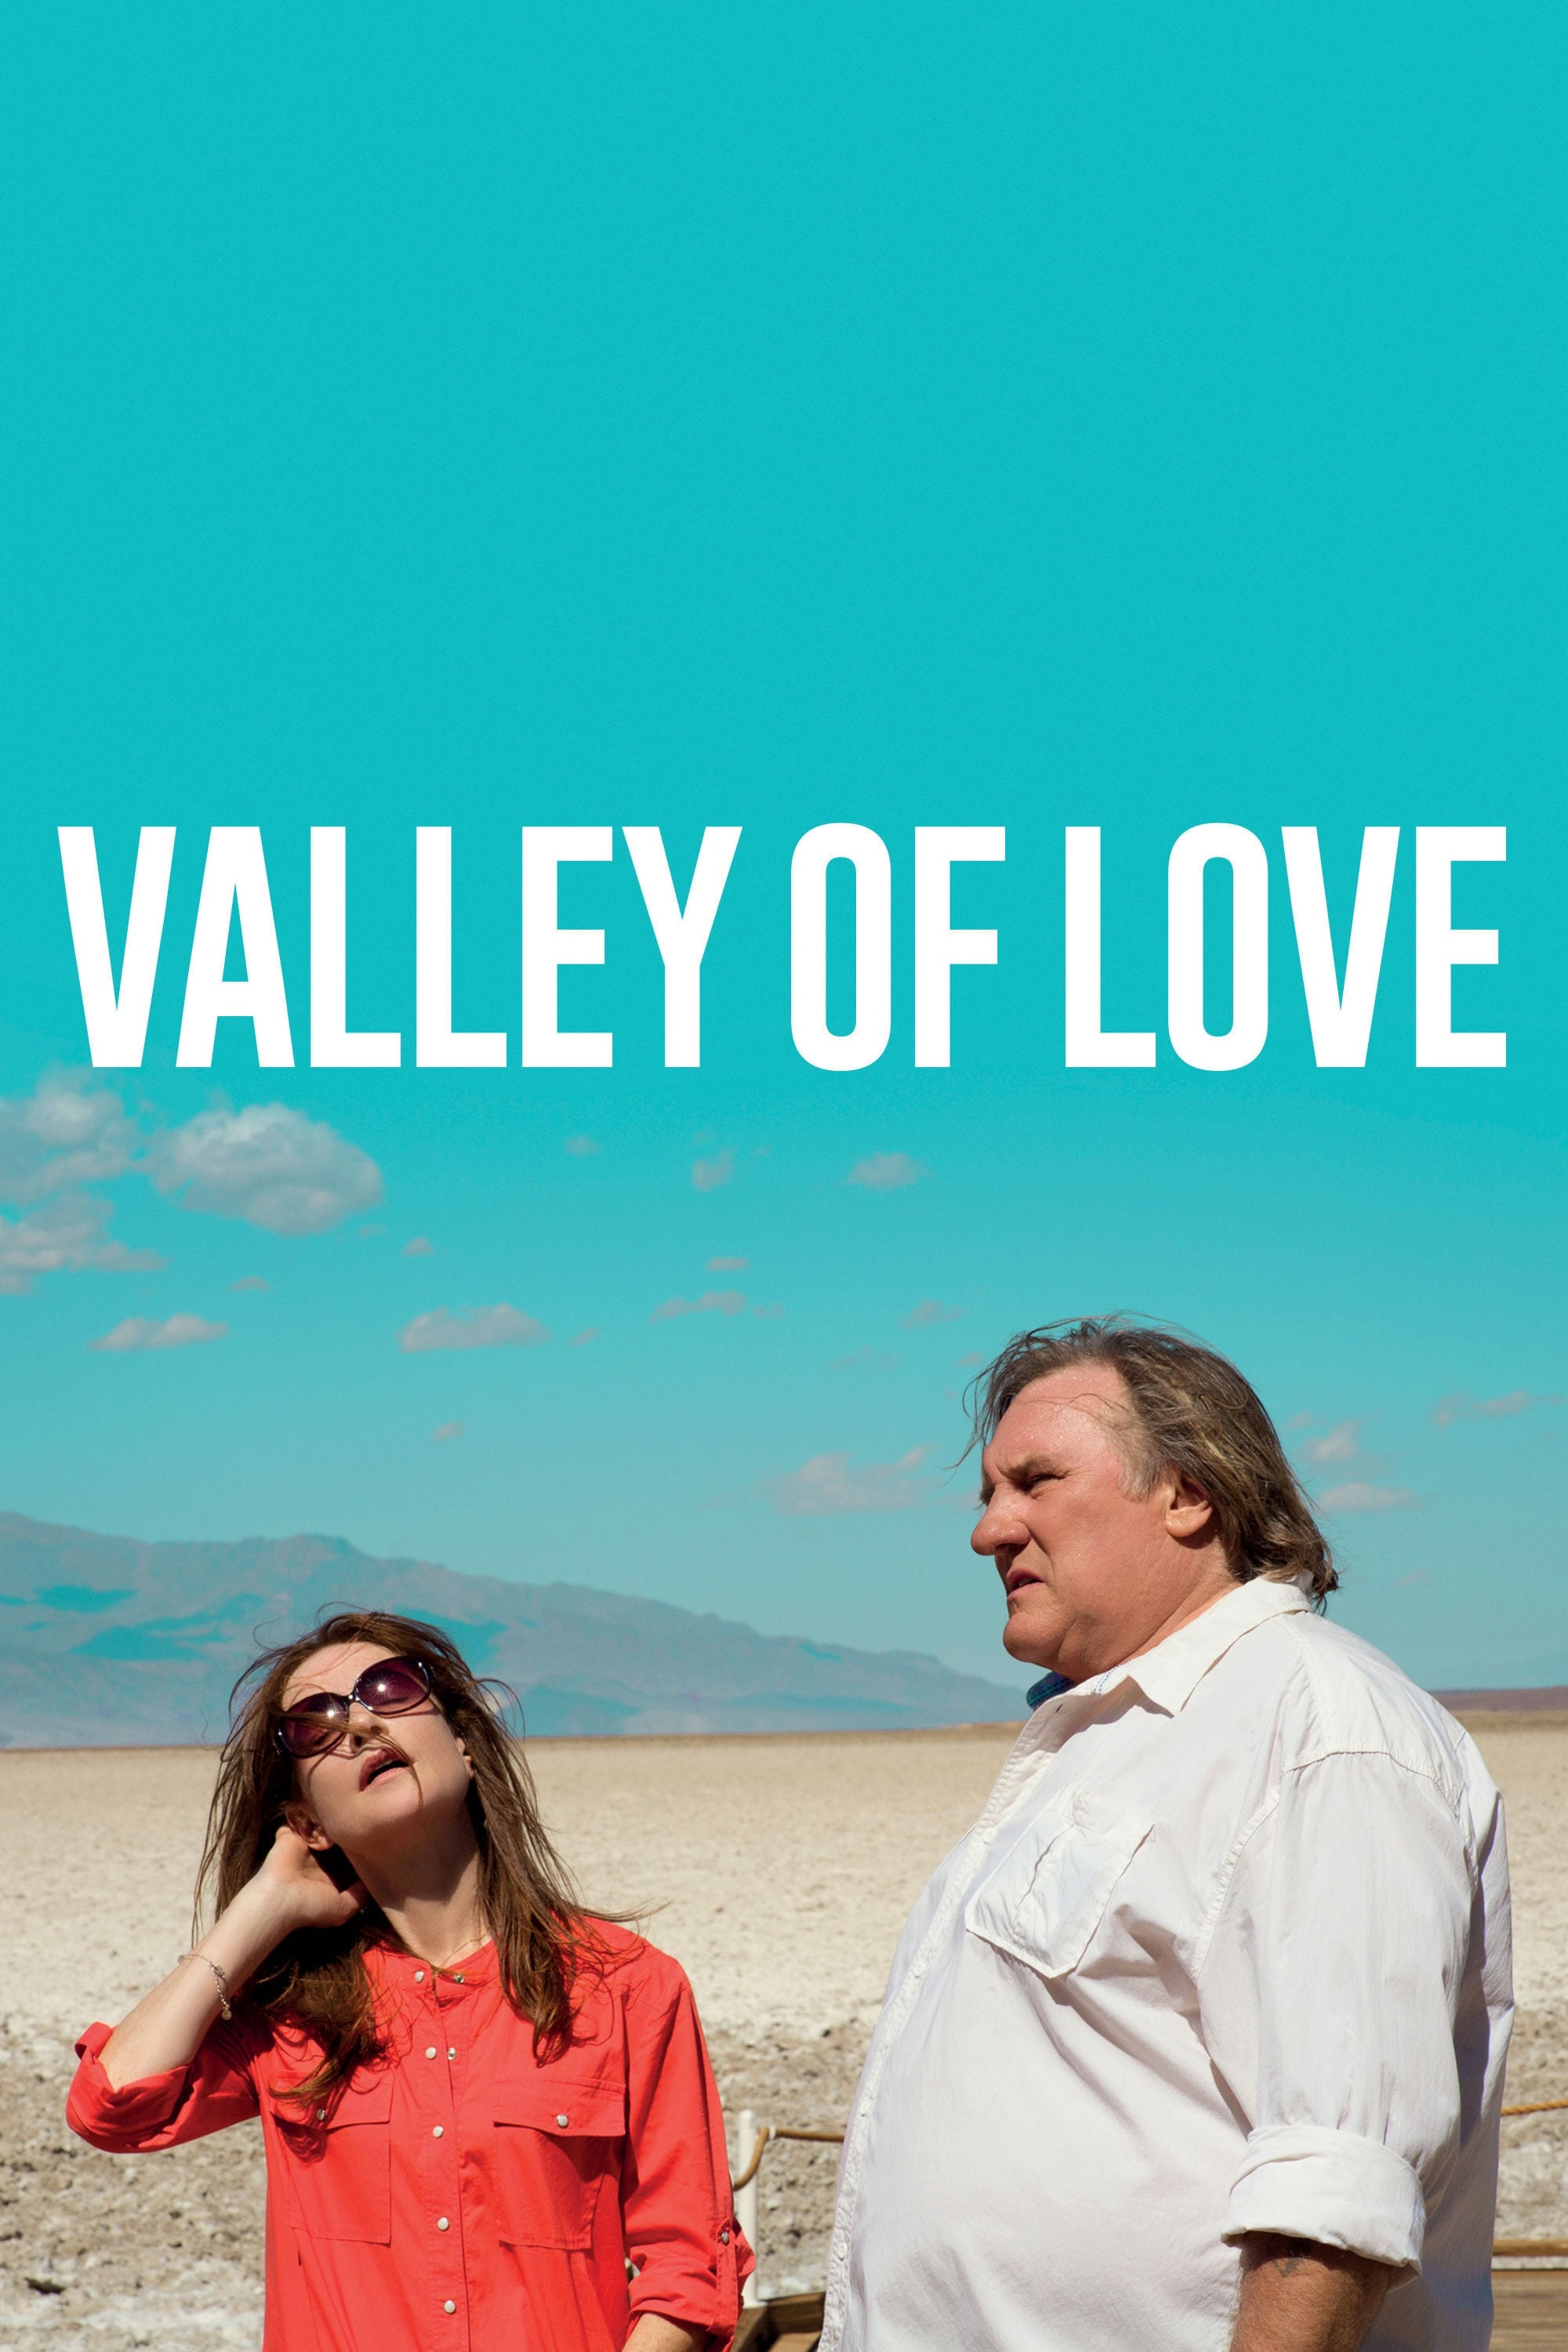 Valley of love streaming sur zone telechargement